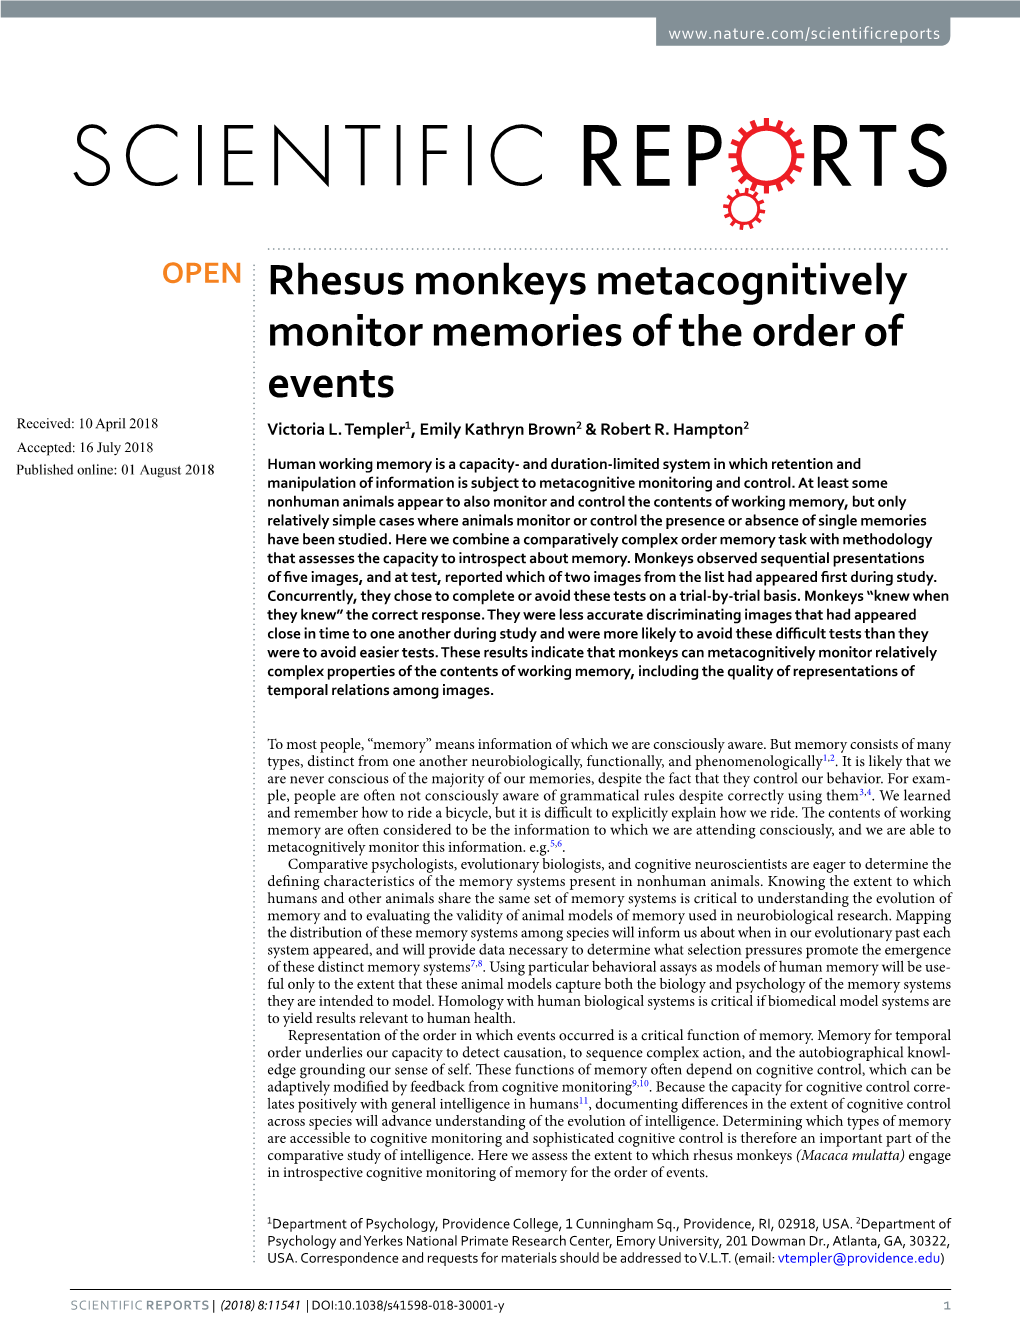 Rhesus Monkeys Metacognitively Monitor Memories of the Order of Events Received: 10 April 2018 Victoria L